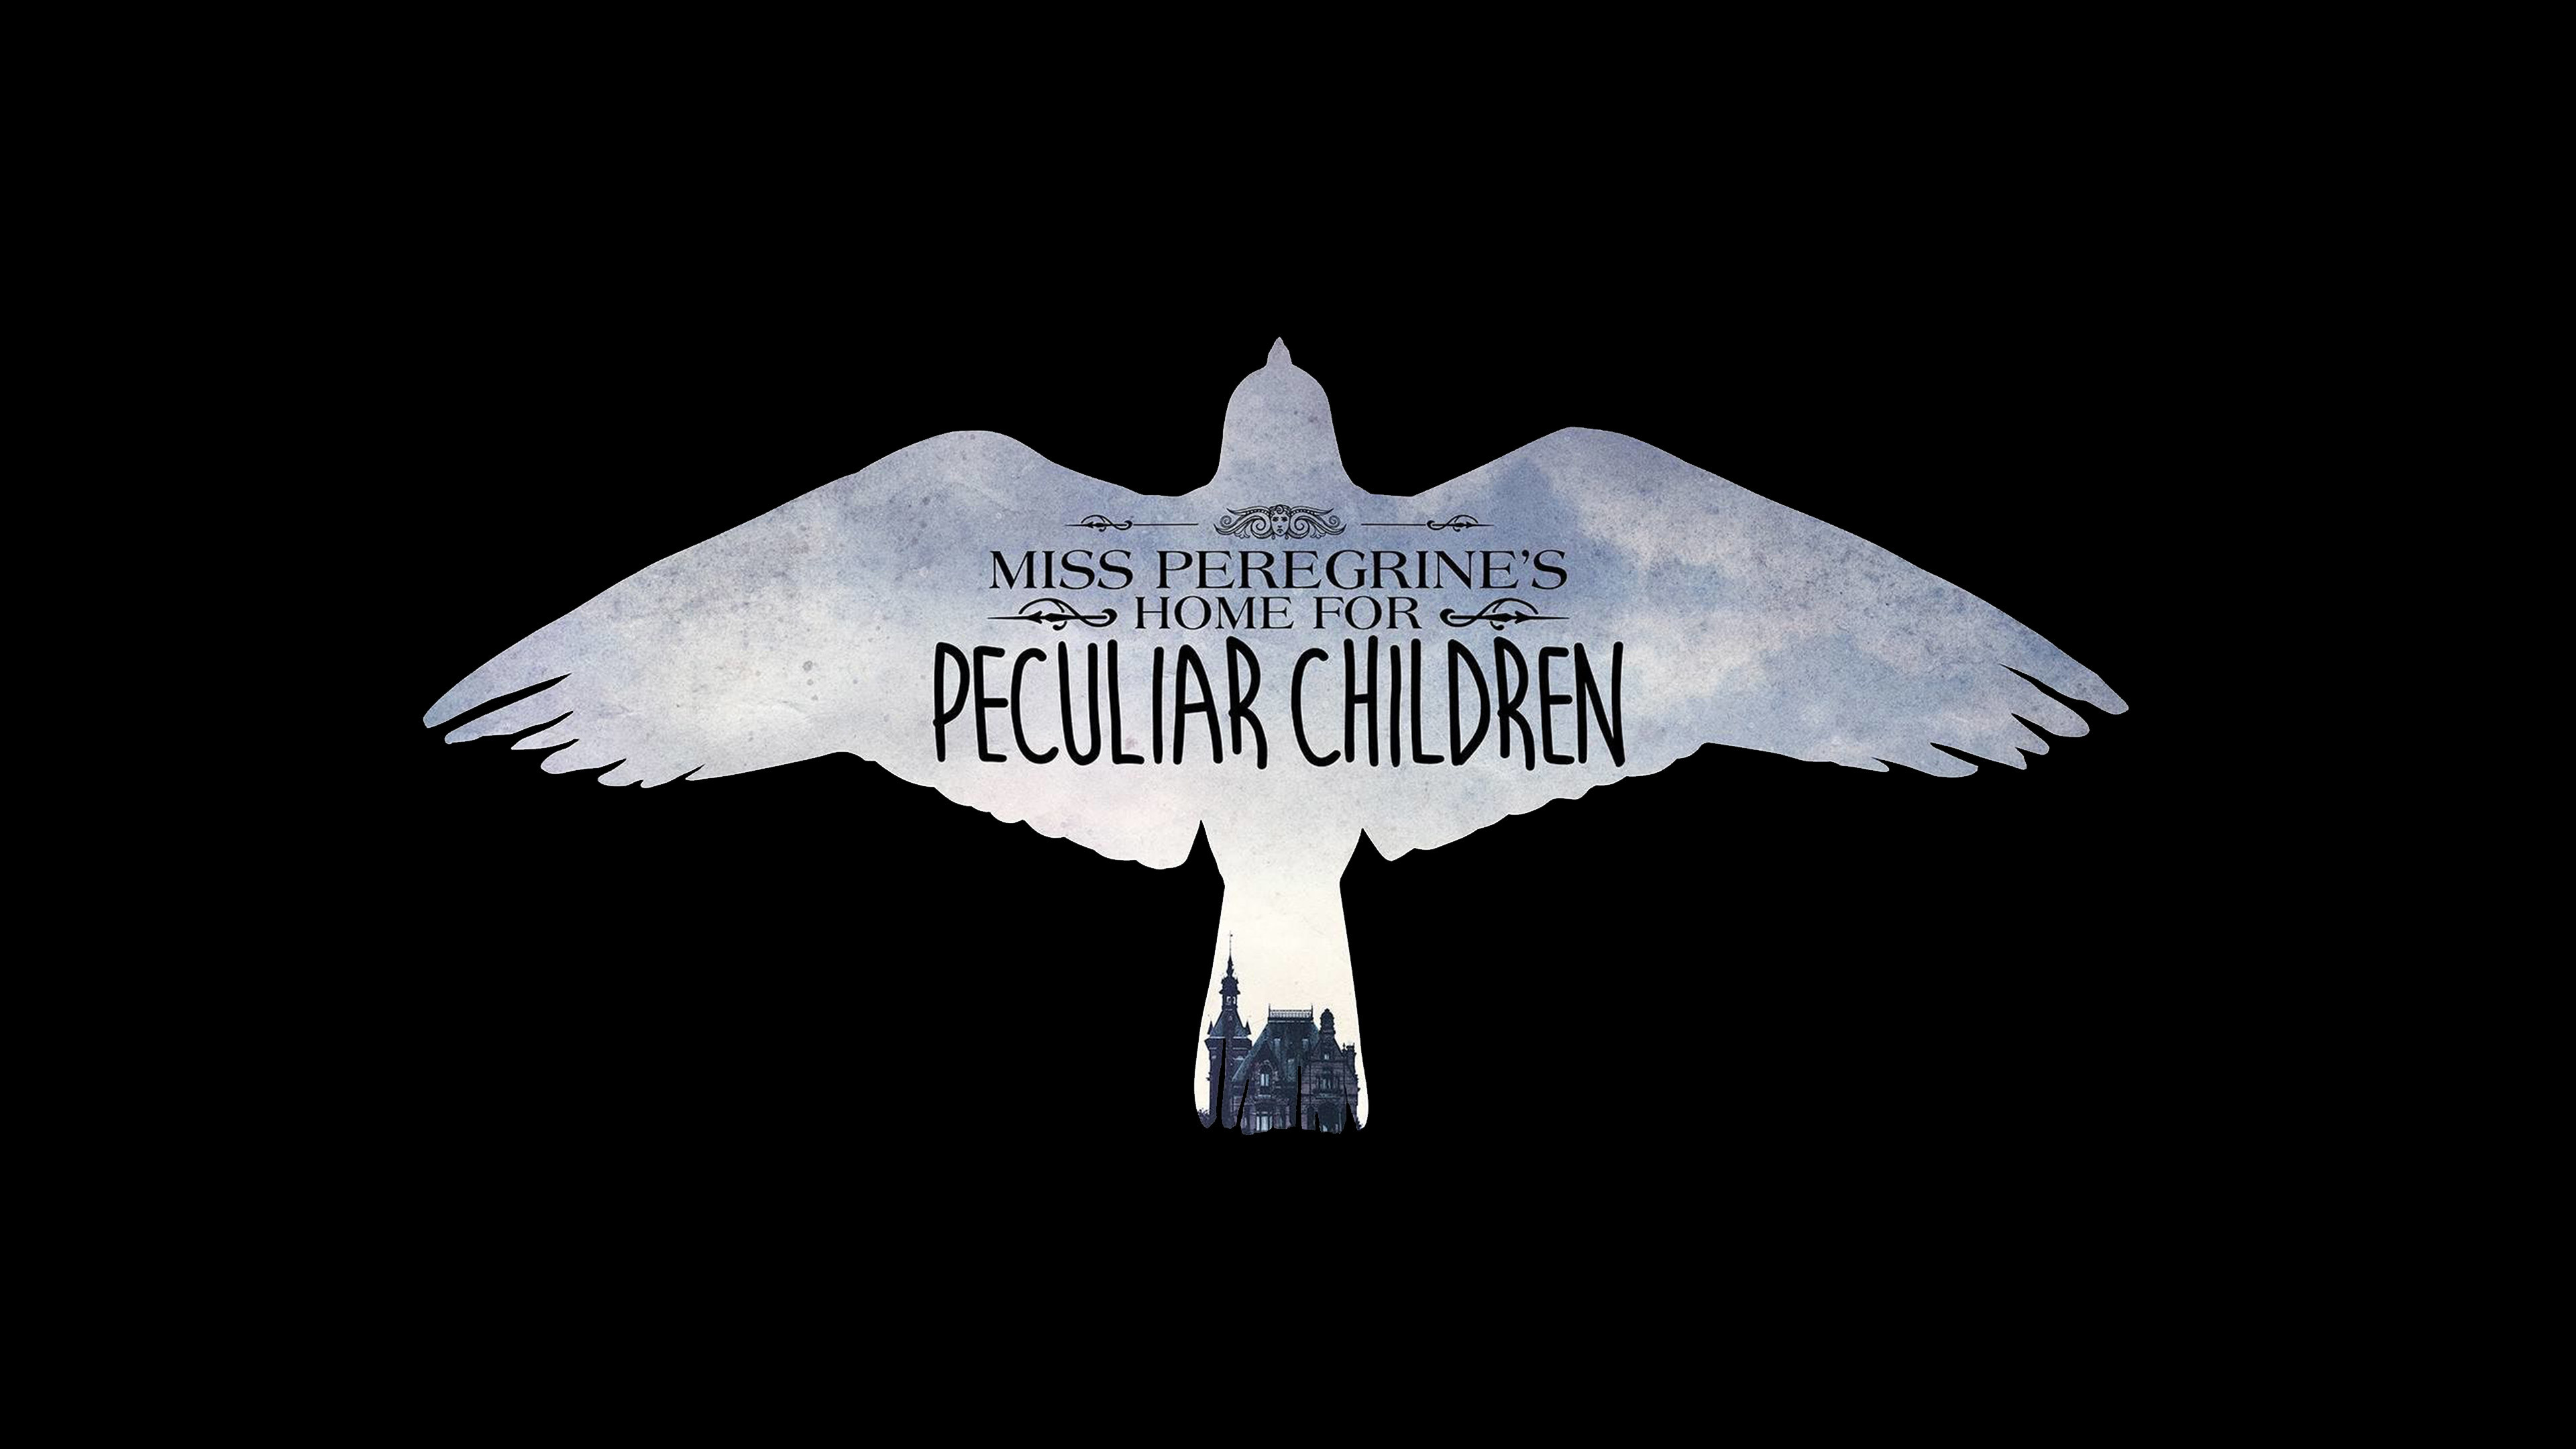 3840x2160 Miss Peregrine's Home for Peculiar Children Wallpaper HD